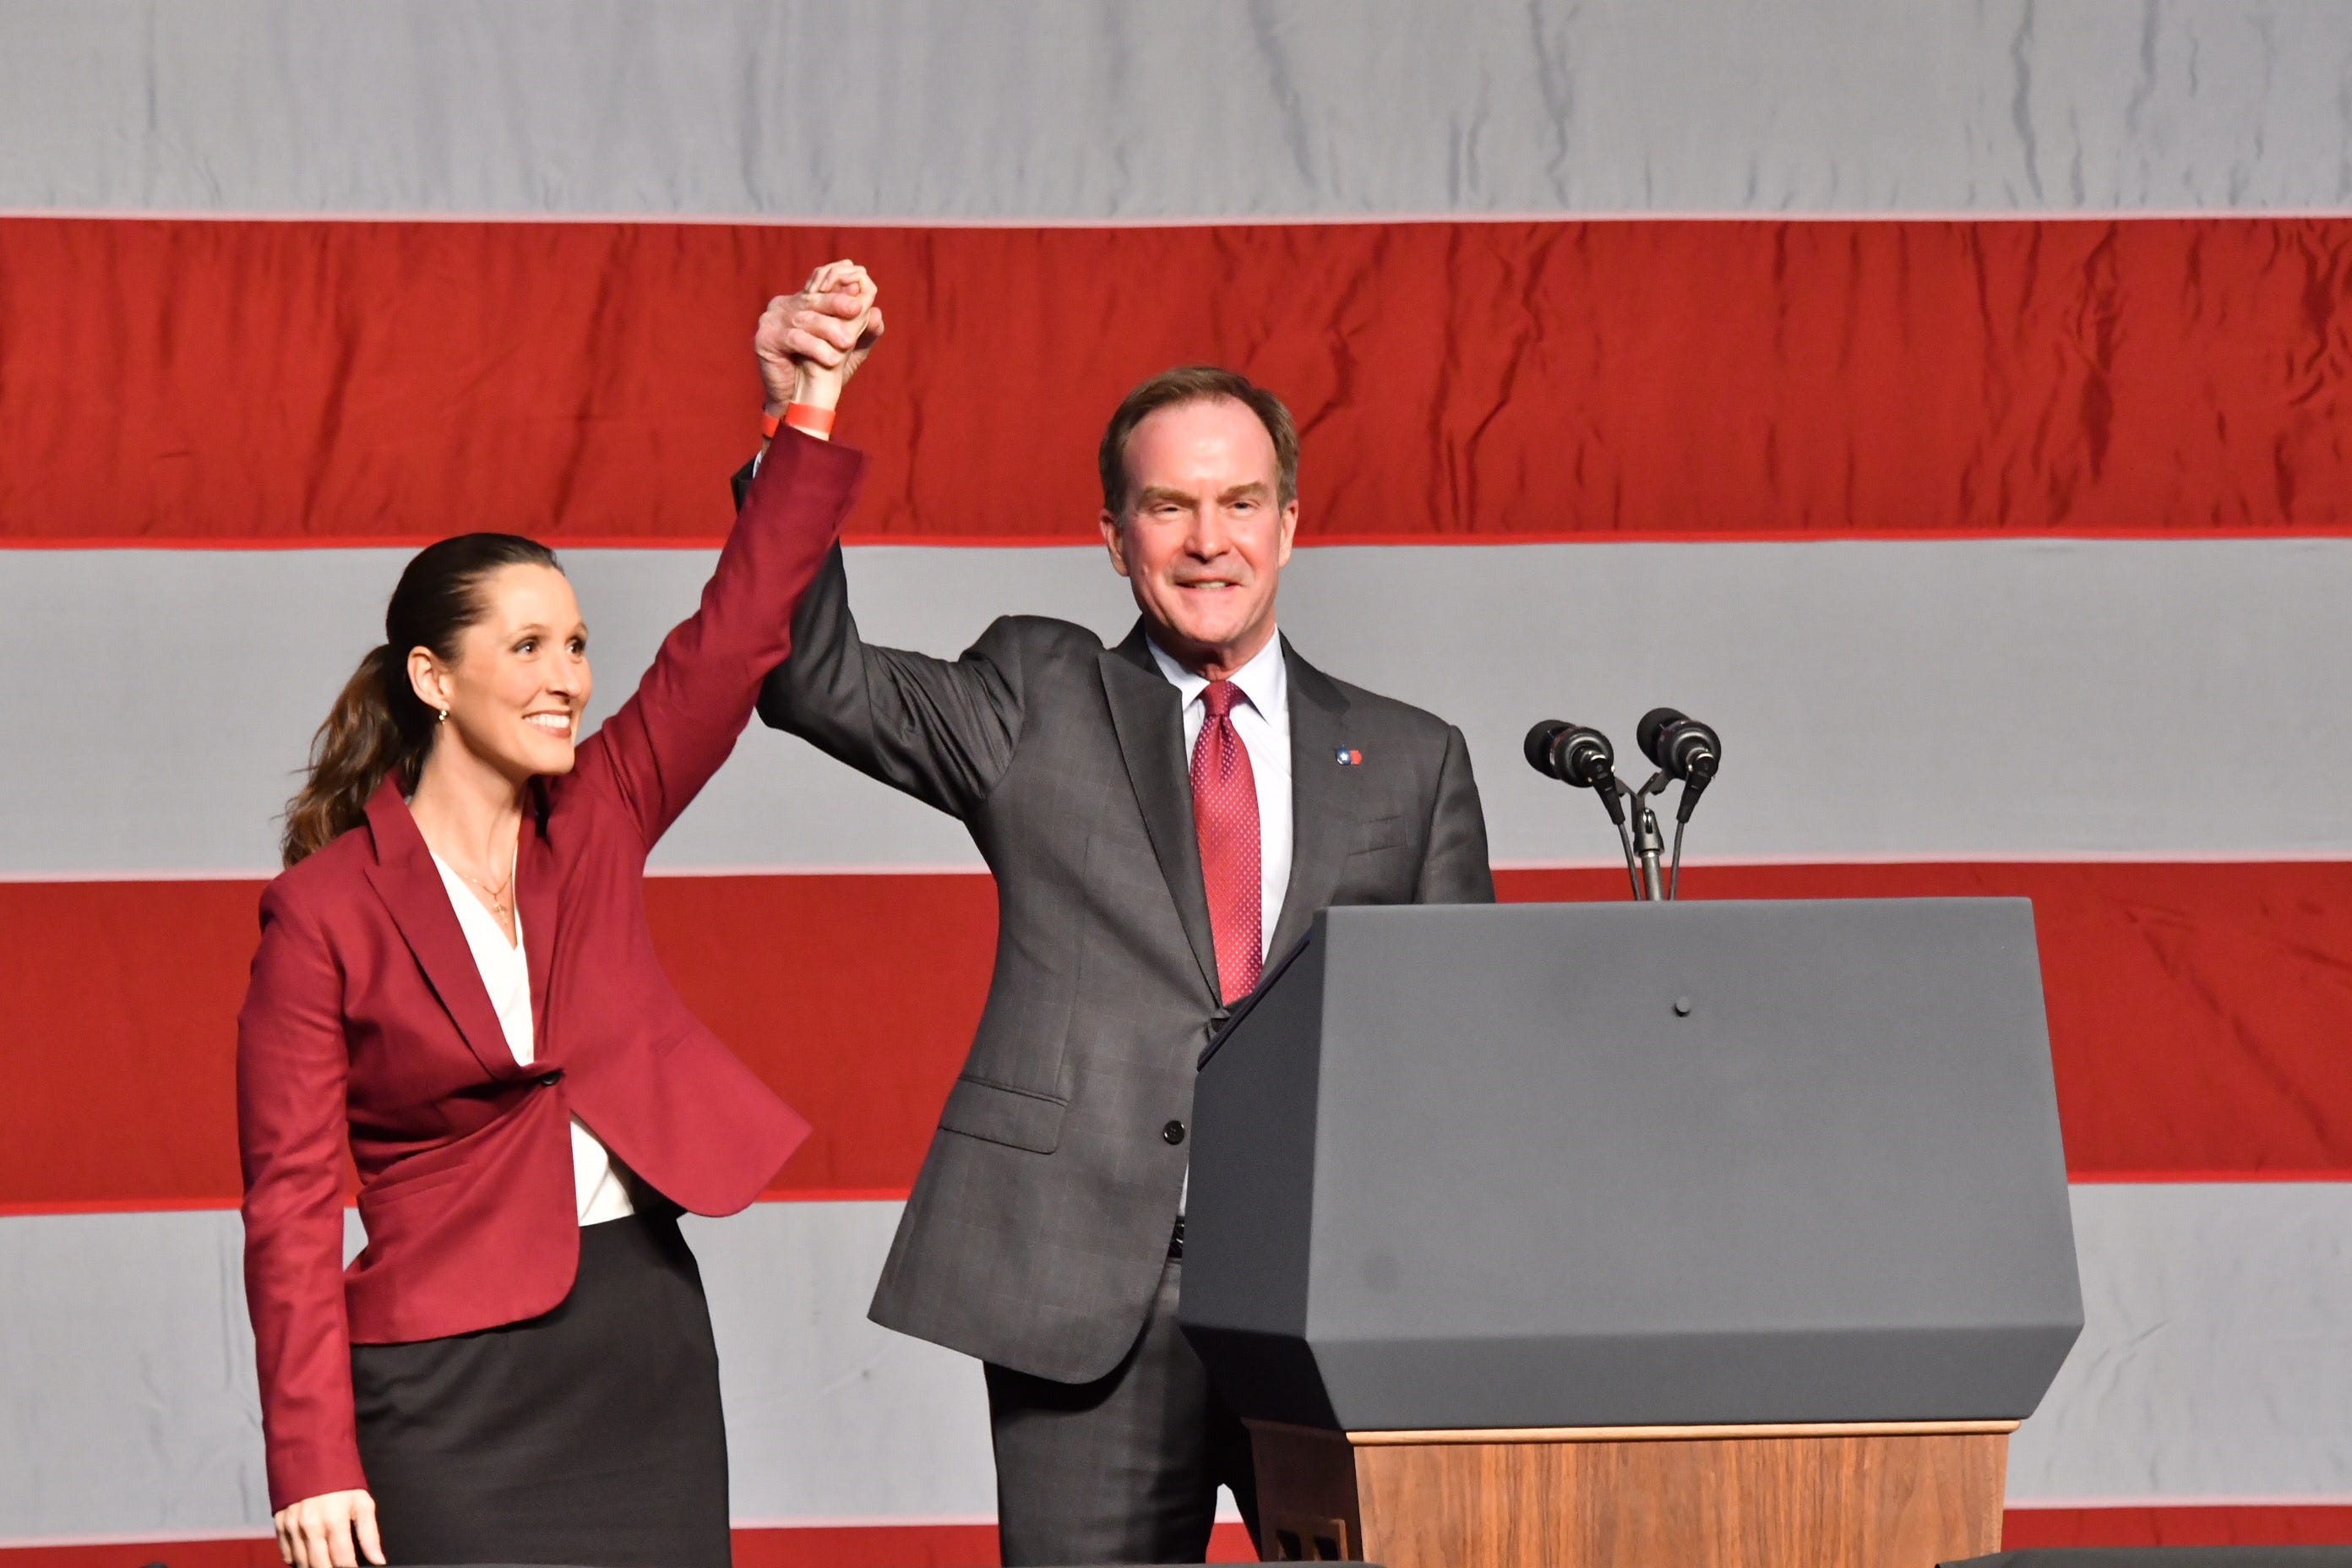 Bill Schuette and Lisa Posthumus Lyons take the stage before Vice President Mike Pence.